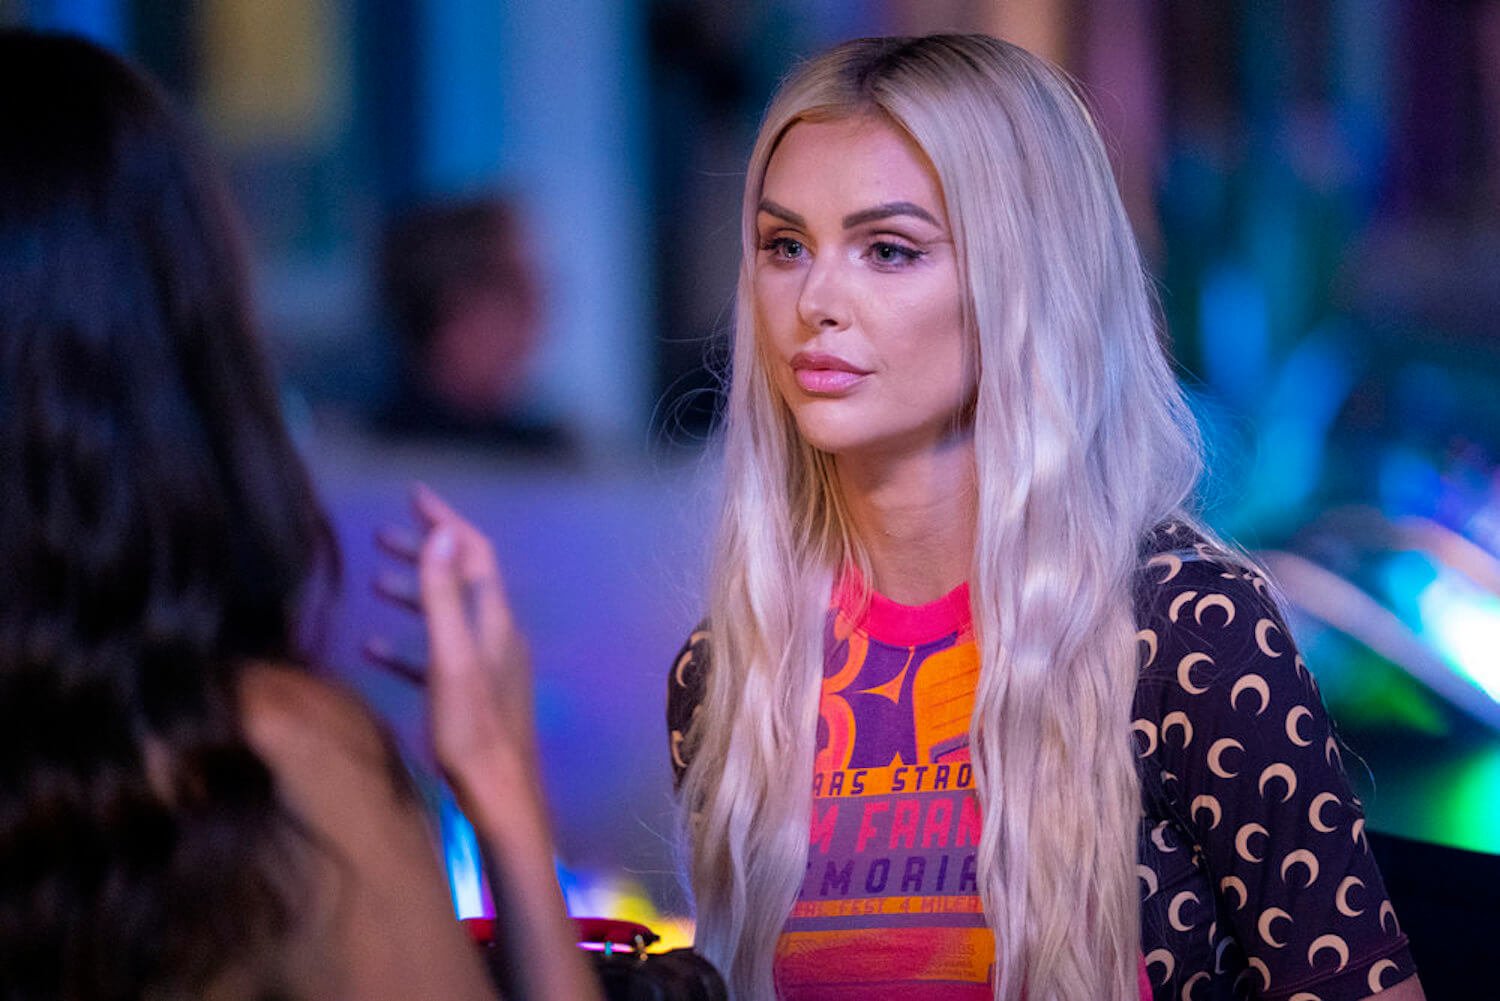 'Vanderpump Rules' Lala confessed to Raquel that she had sex with James while he and Raquel were together. Lala is seen here wearing a neon pink and black shirt in a production still.